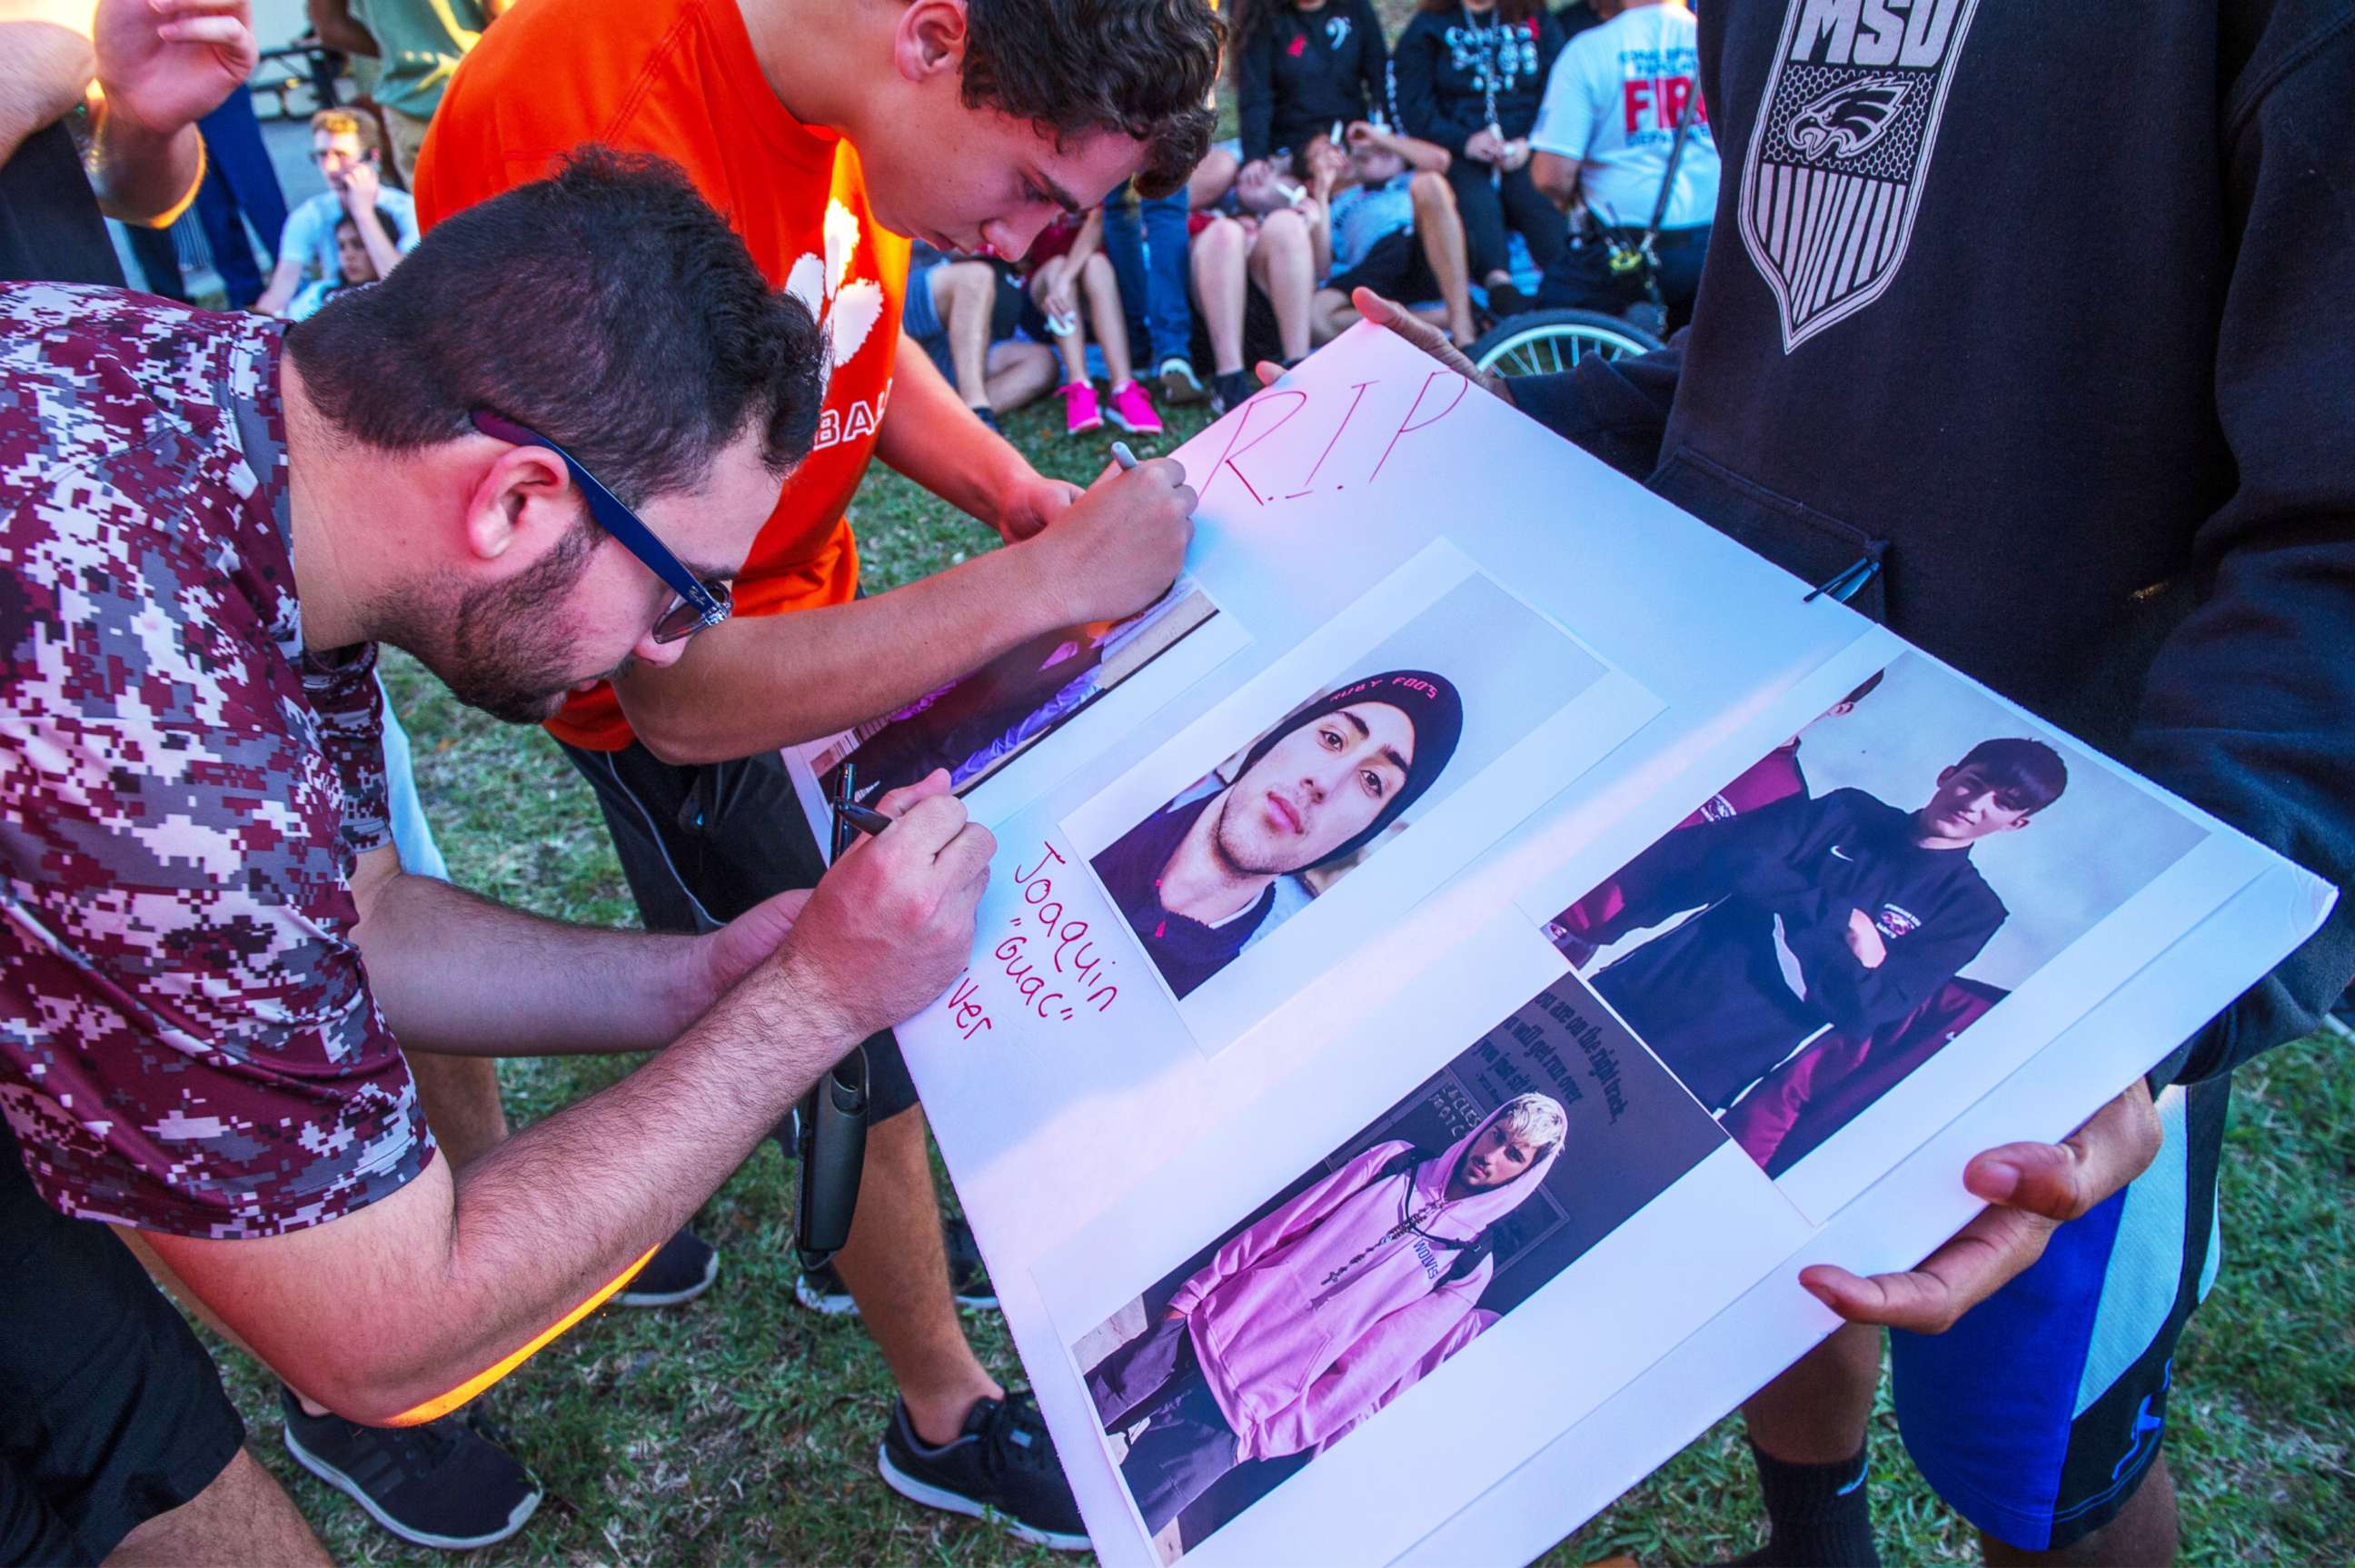 PHOTO: Students sign a poster with photos of Joaquin Oliver, one of the victims of a school shooting, during a candlelight vigil at the Amphitheater at Pine Trails Park, Parkland, Fla., Feb. 15, 2018.